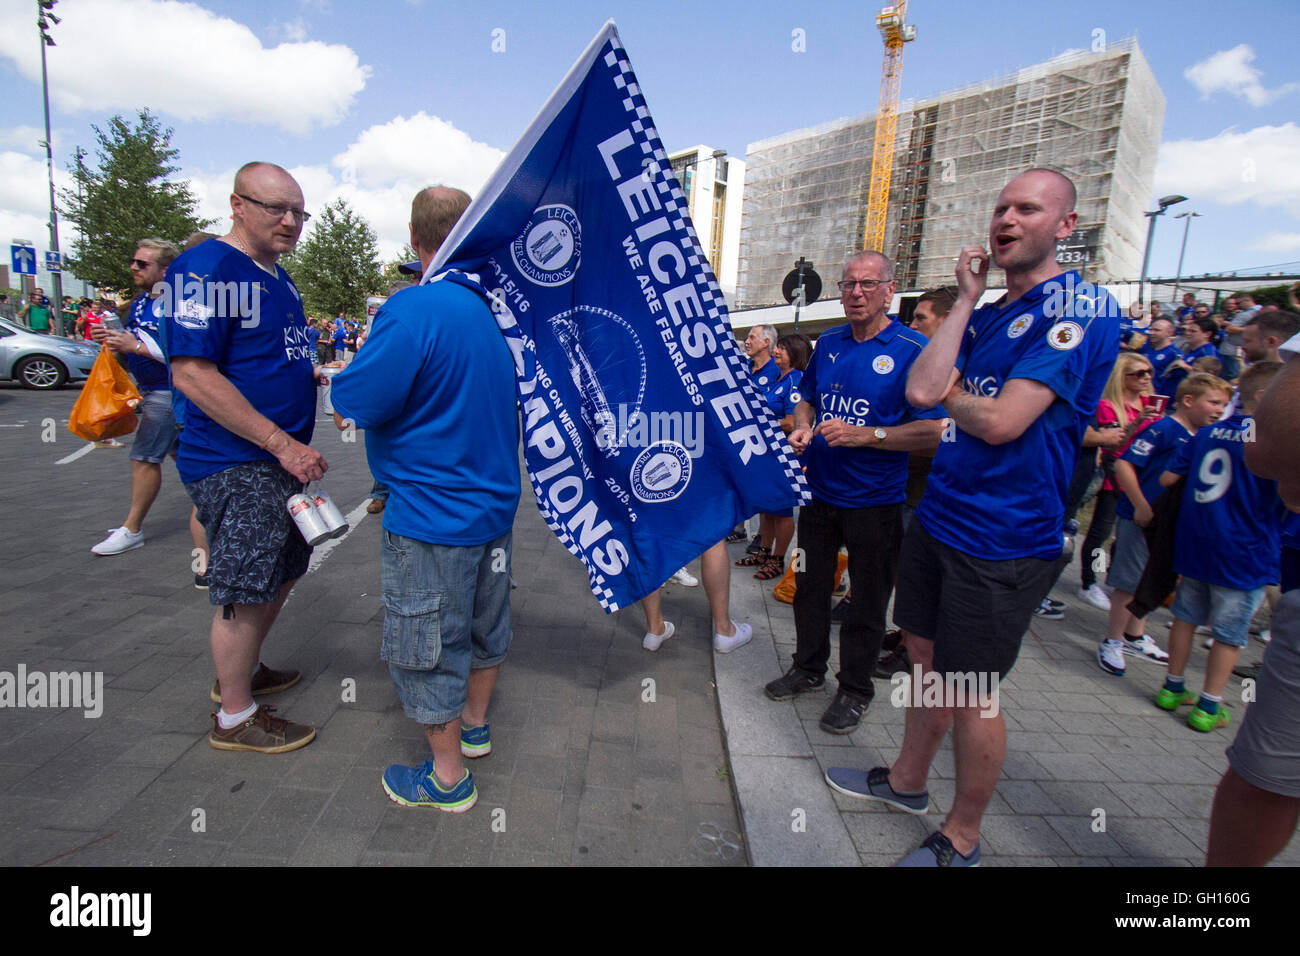 Wembley London, UK. 7th August 2016. Leicester City fill the fanzone to support their team as newly crowned Champions of England for Community Shield trophy against Manchester United. The Football Association Community Shield is contested annually between the champions of the previous Premier League season and the holders of the FA Cup at Wembley Stadium Credit:  amer ghazzal/Alamy Live News Stock Photo